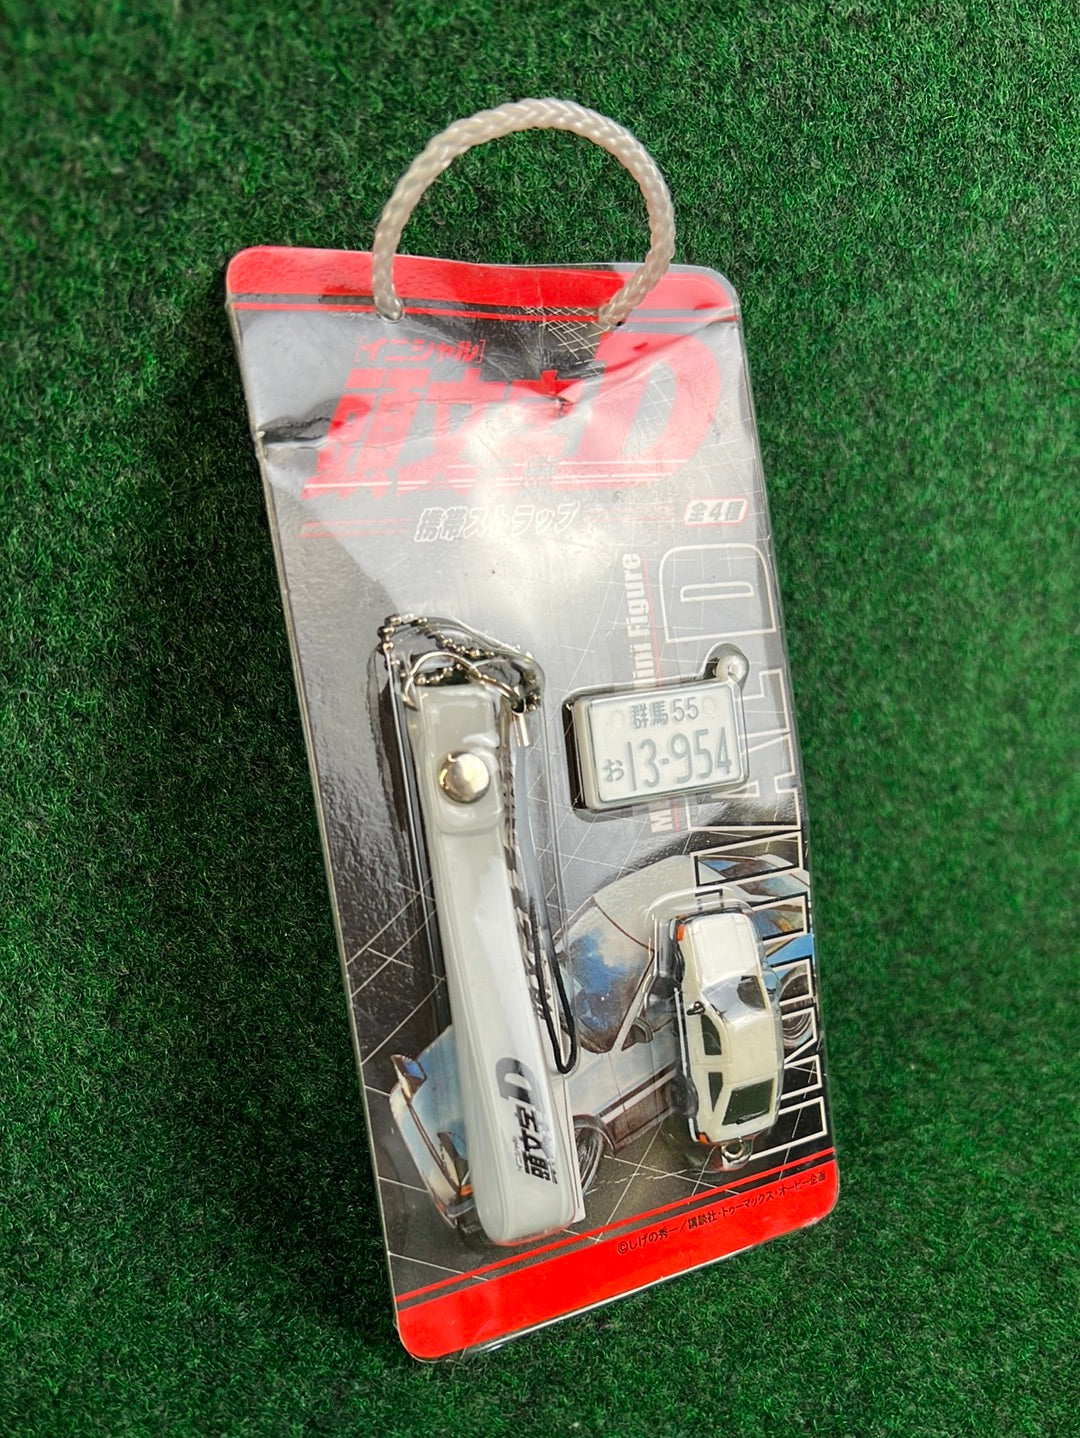 Initial D - Toyota Corolla AE86 Car, Strap and License Plate Charm Keychain Set